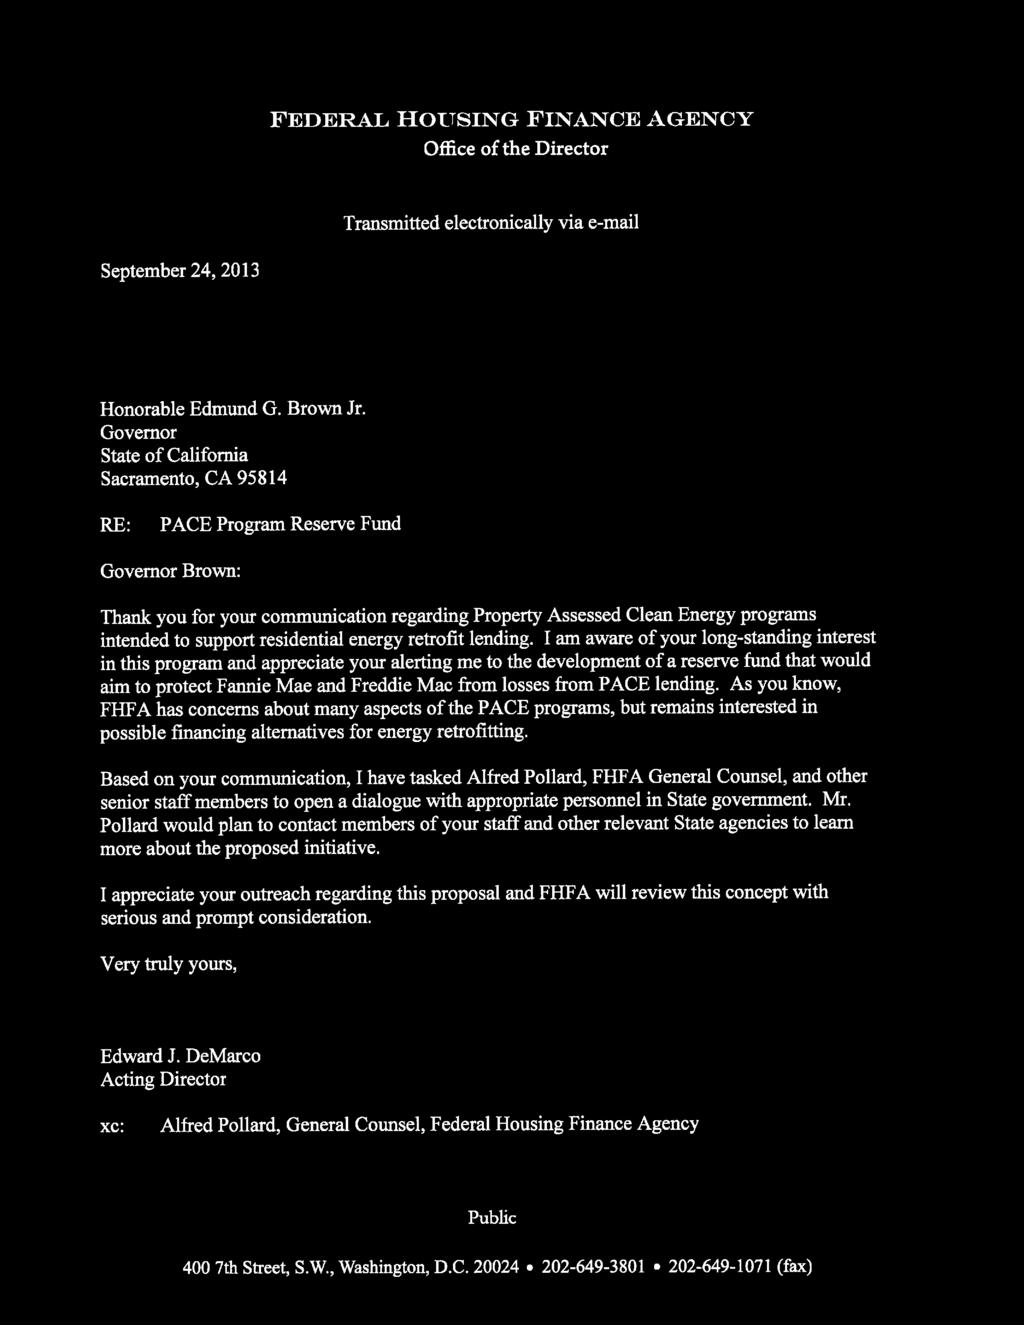 Attachment 2 - FHFA Letter to Governor Brown FEDERAL HOUSING FINANCE AGENCY Office of the Director Transmitted electronically via e-mail September Honorable Edmund G. Brown Jr.